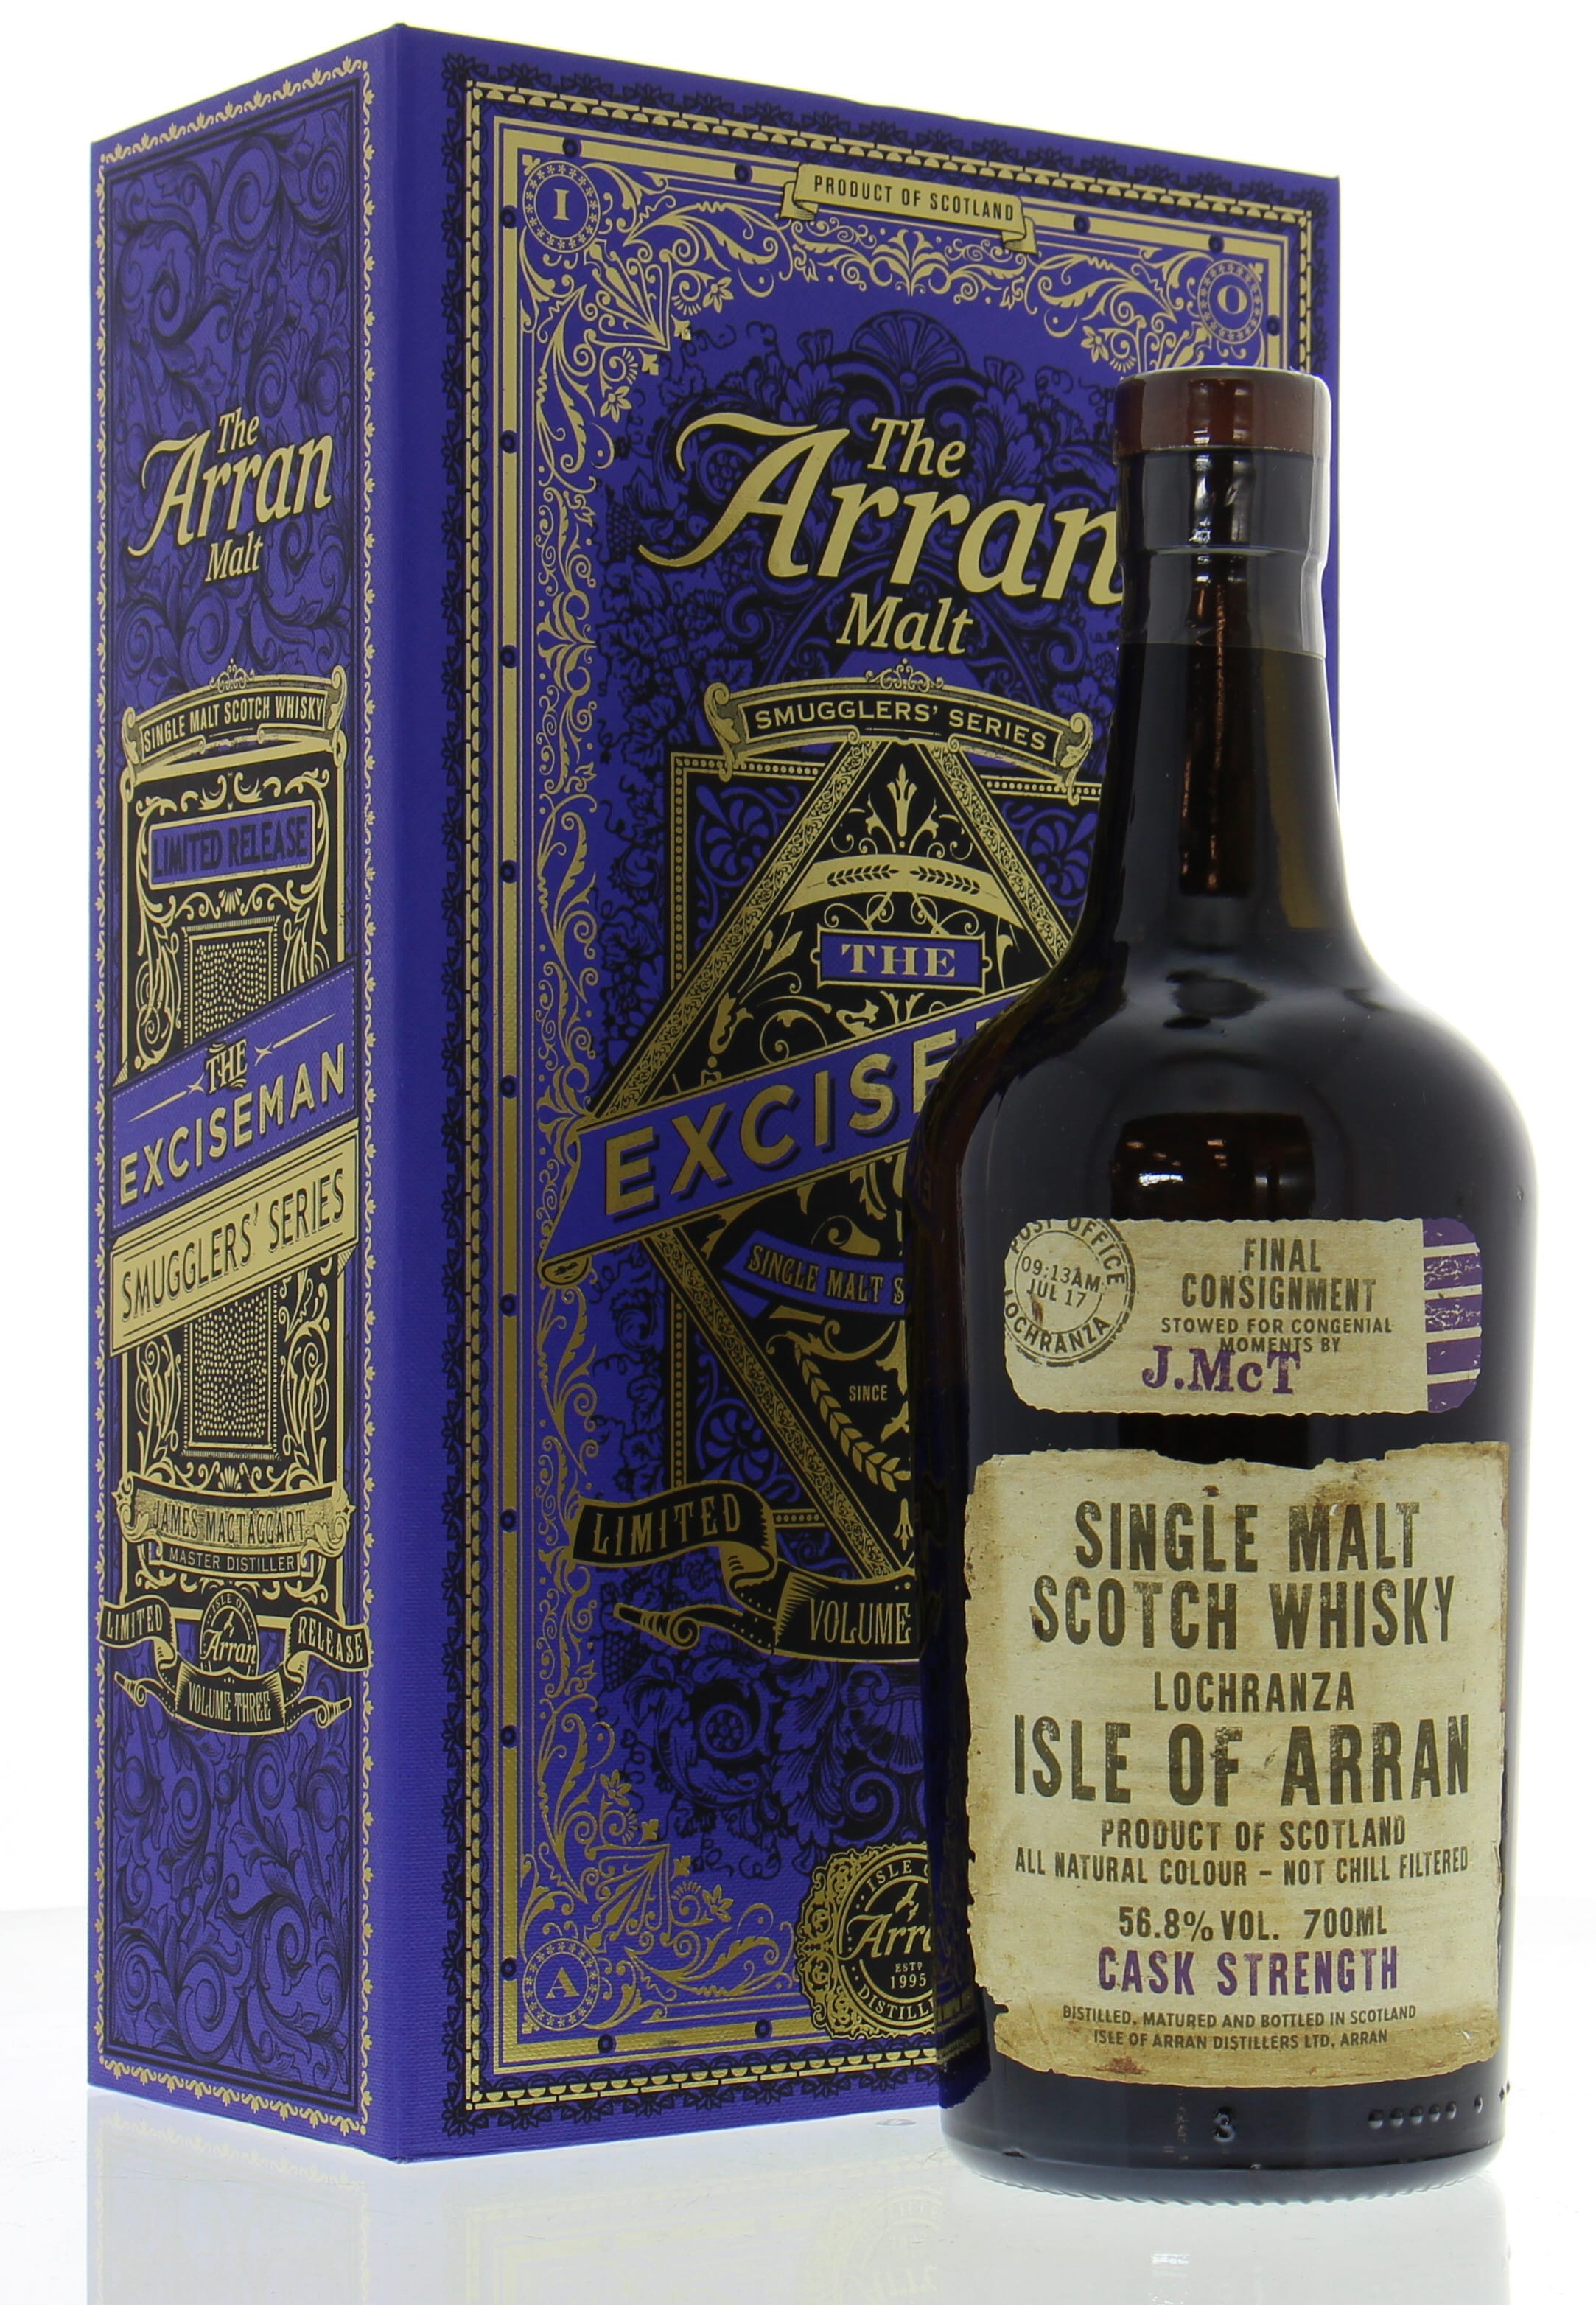 Arran - The Exciseman Smugglers‘ Series No 3 56.8% NV In Original Container